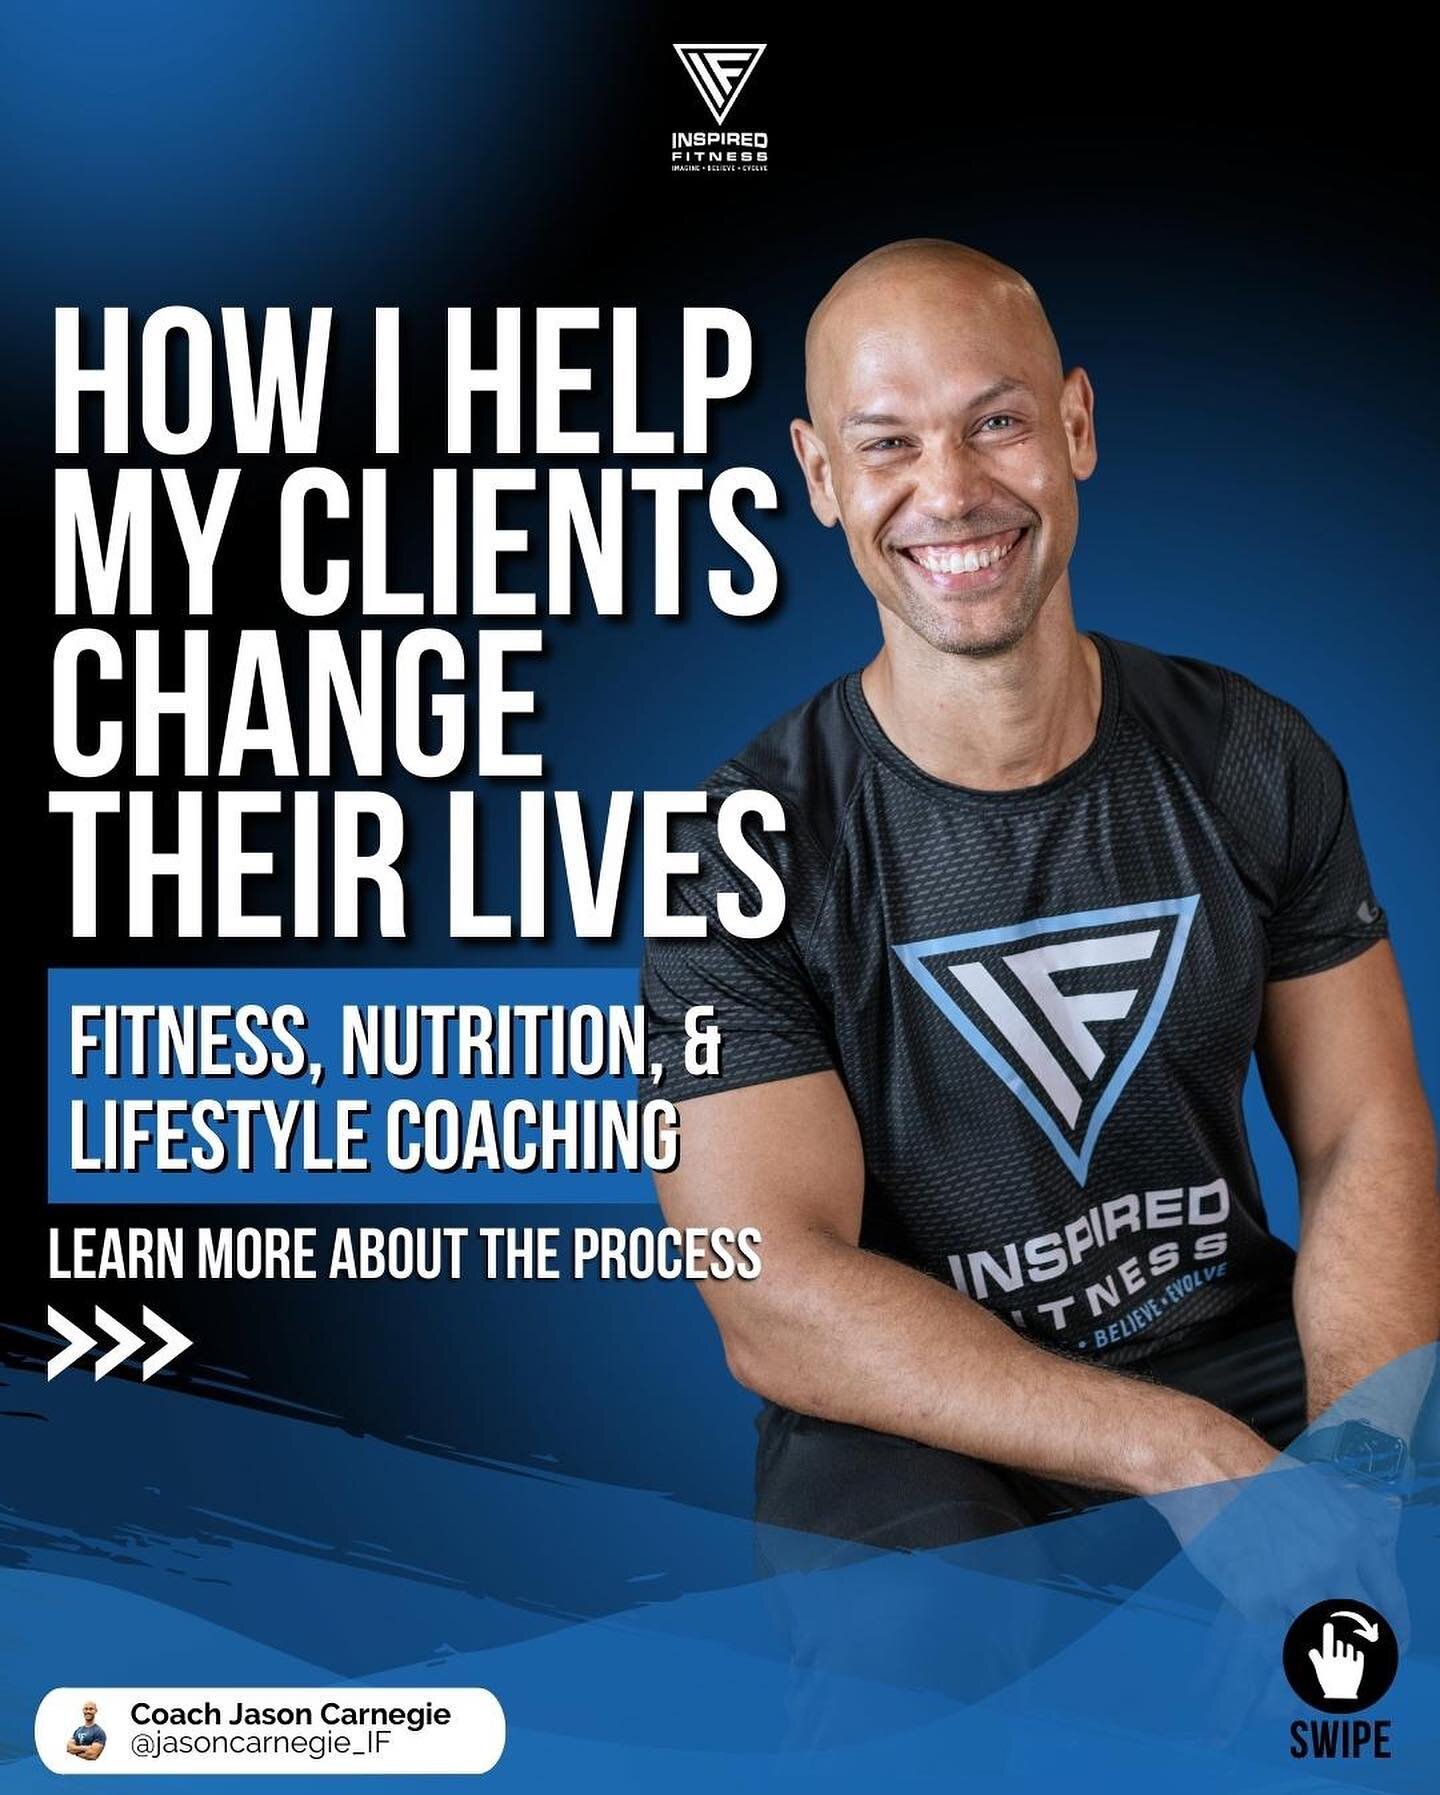 How My Coaching Process Helps Clients Change Their Lives 👀👆🏼👉🏼

I get questions like &ldquo;How much I charge for programs?&rdquo;, &ldquo;Do I write nutrition plans?&rdquo;, &ldquo;How many times do I need to lift to see progress?&rdquo;, &ldqu